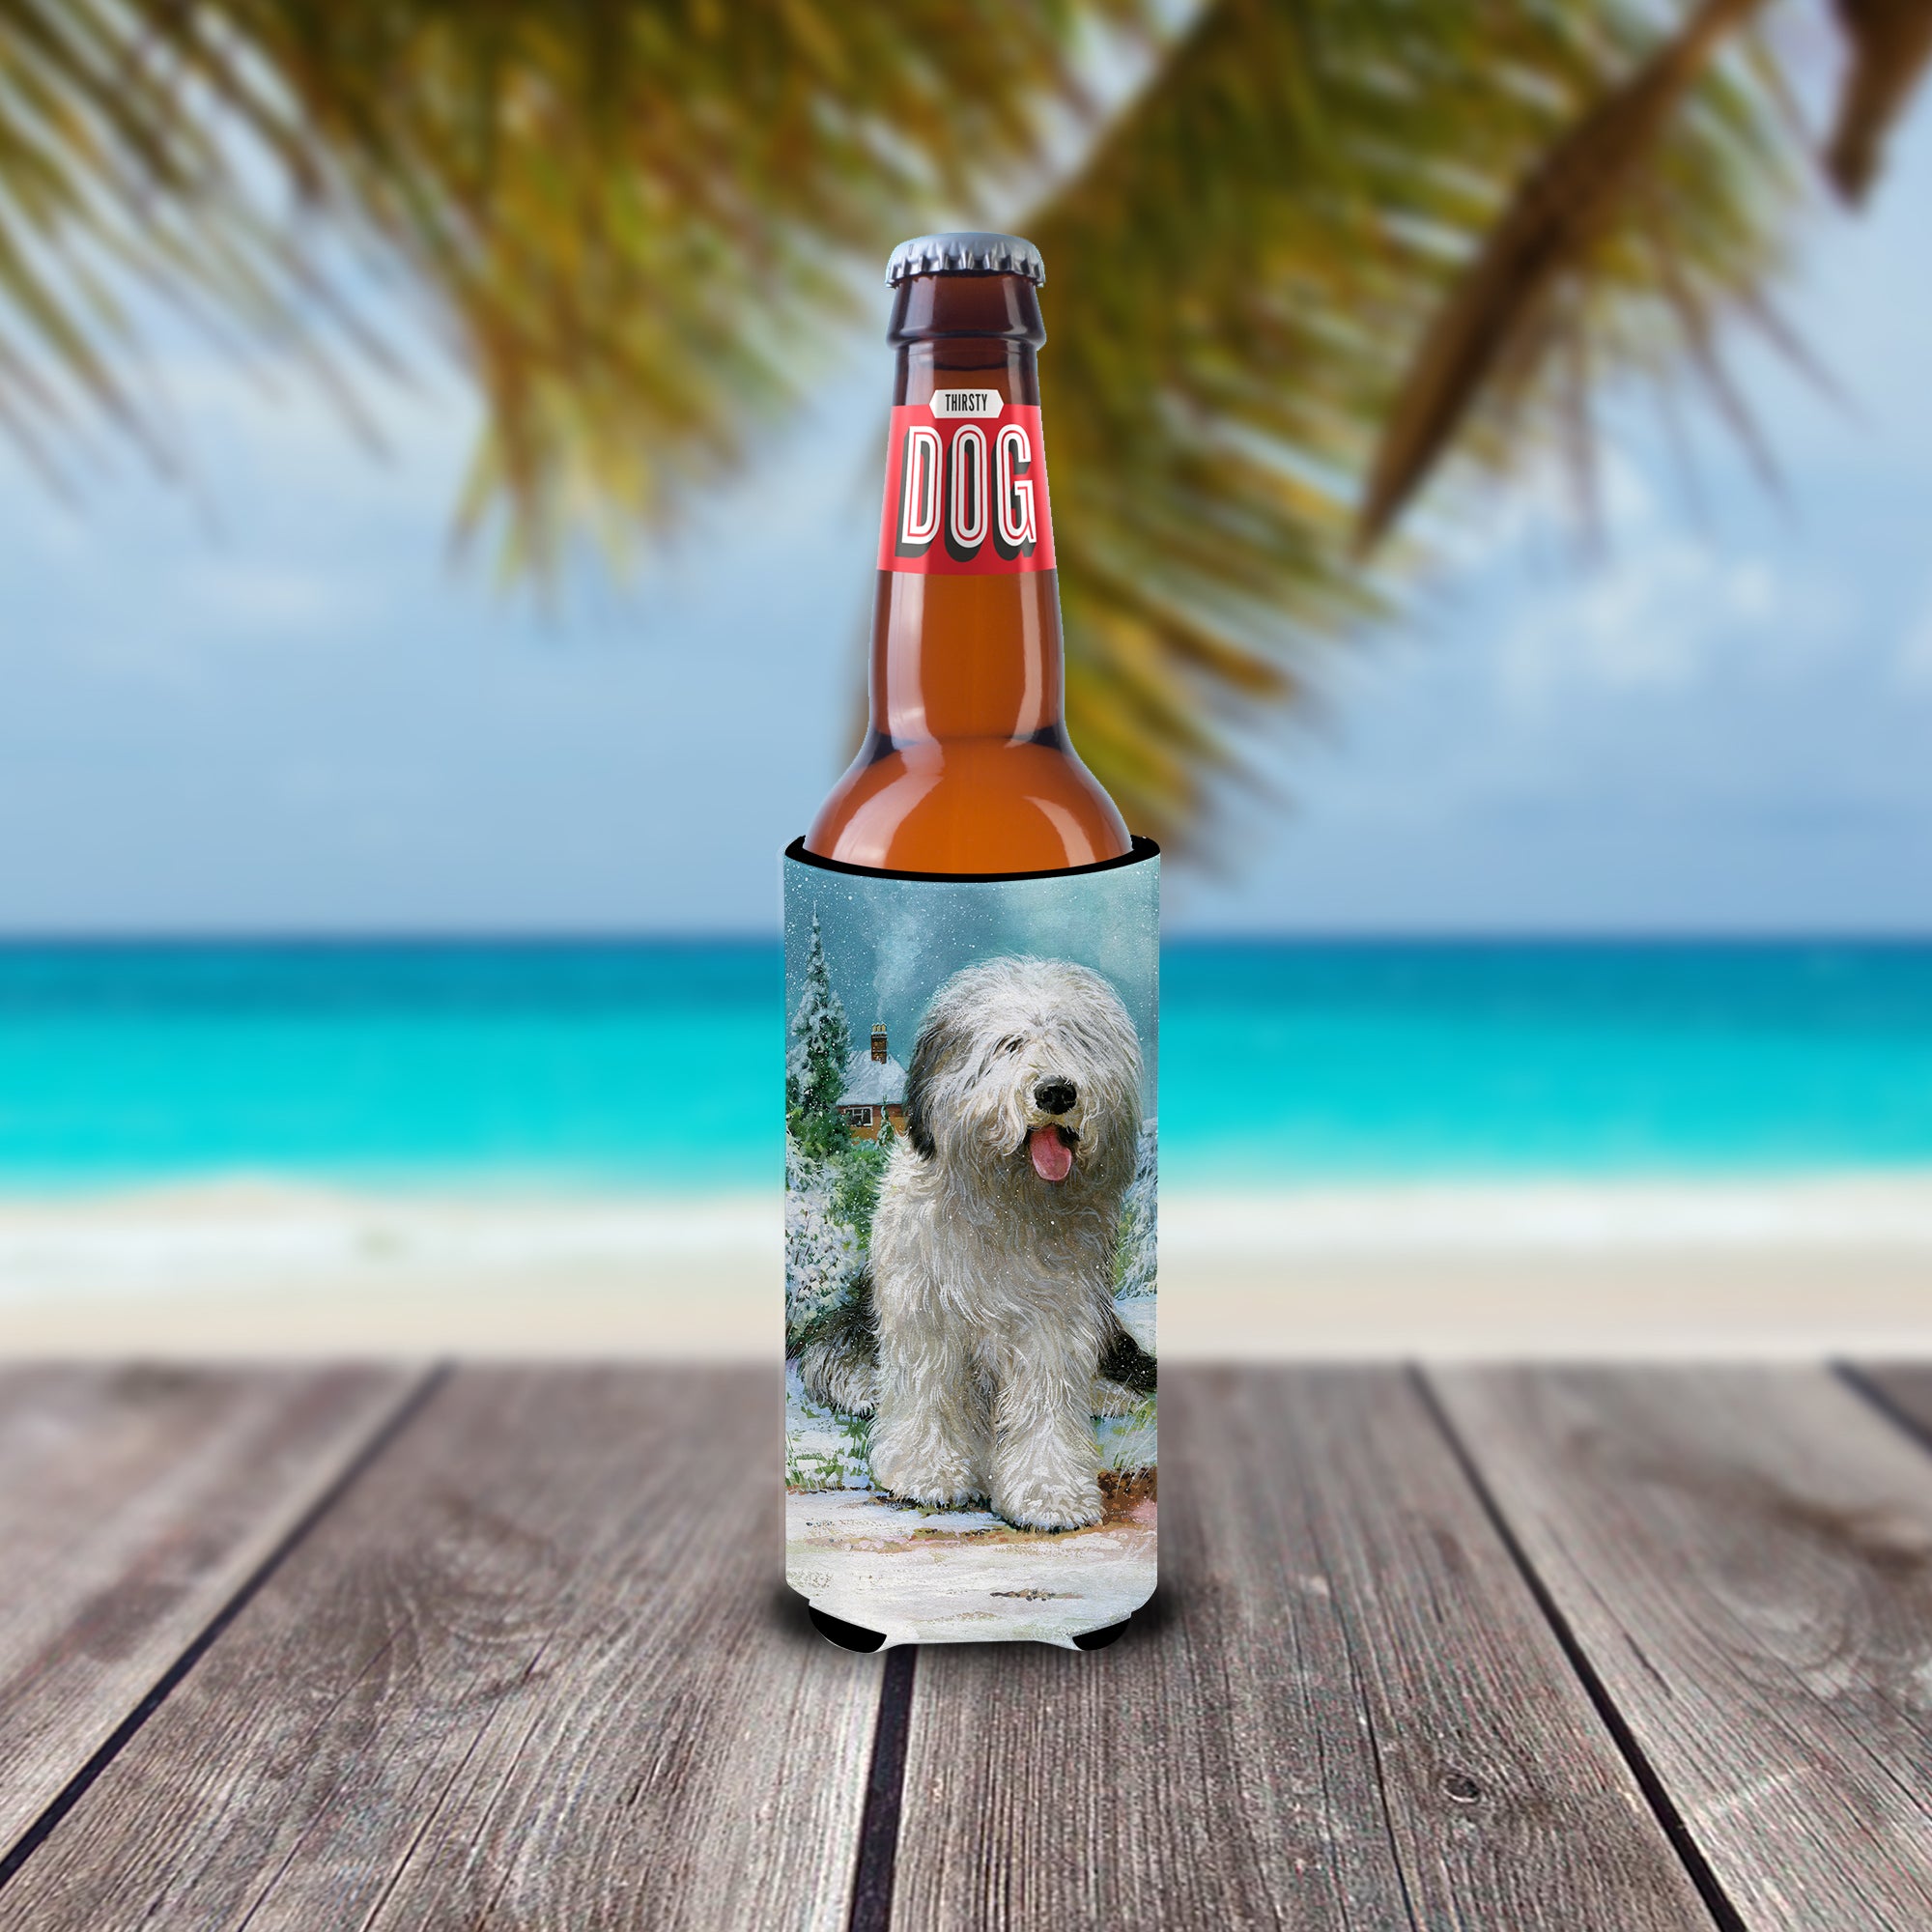 Old English Sheepdog by Don Squires Ultra Beverage Isolateurs pour canettes minces SDSQ0304MUK